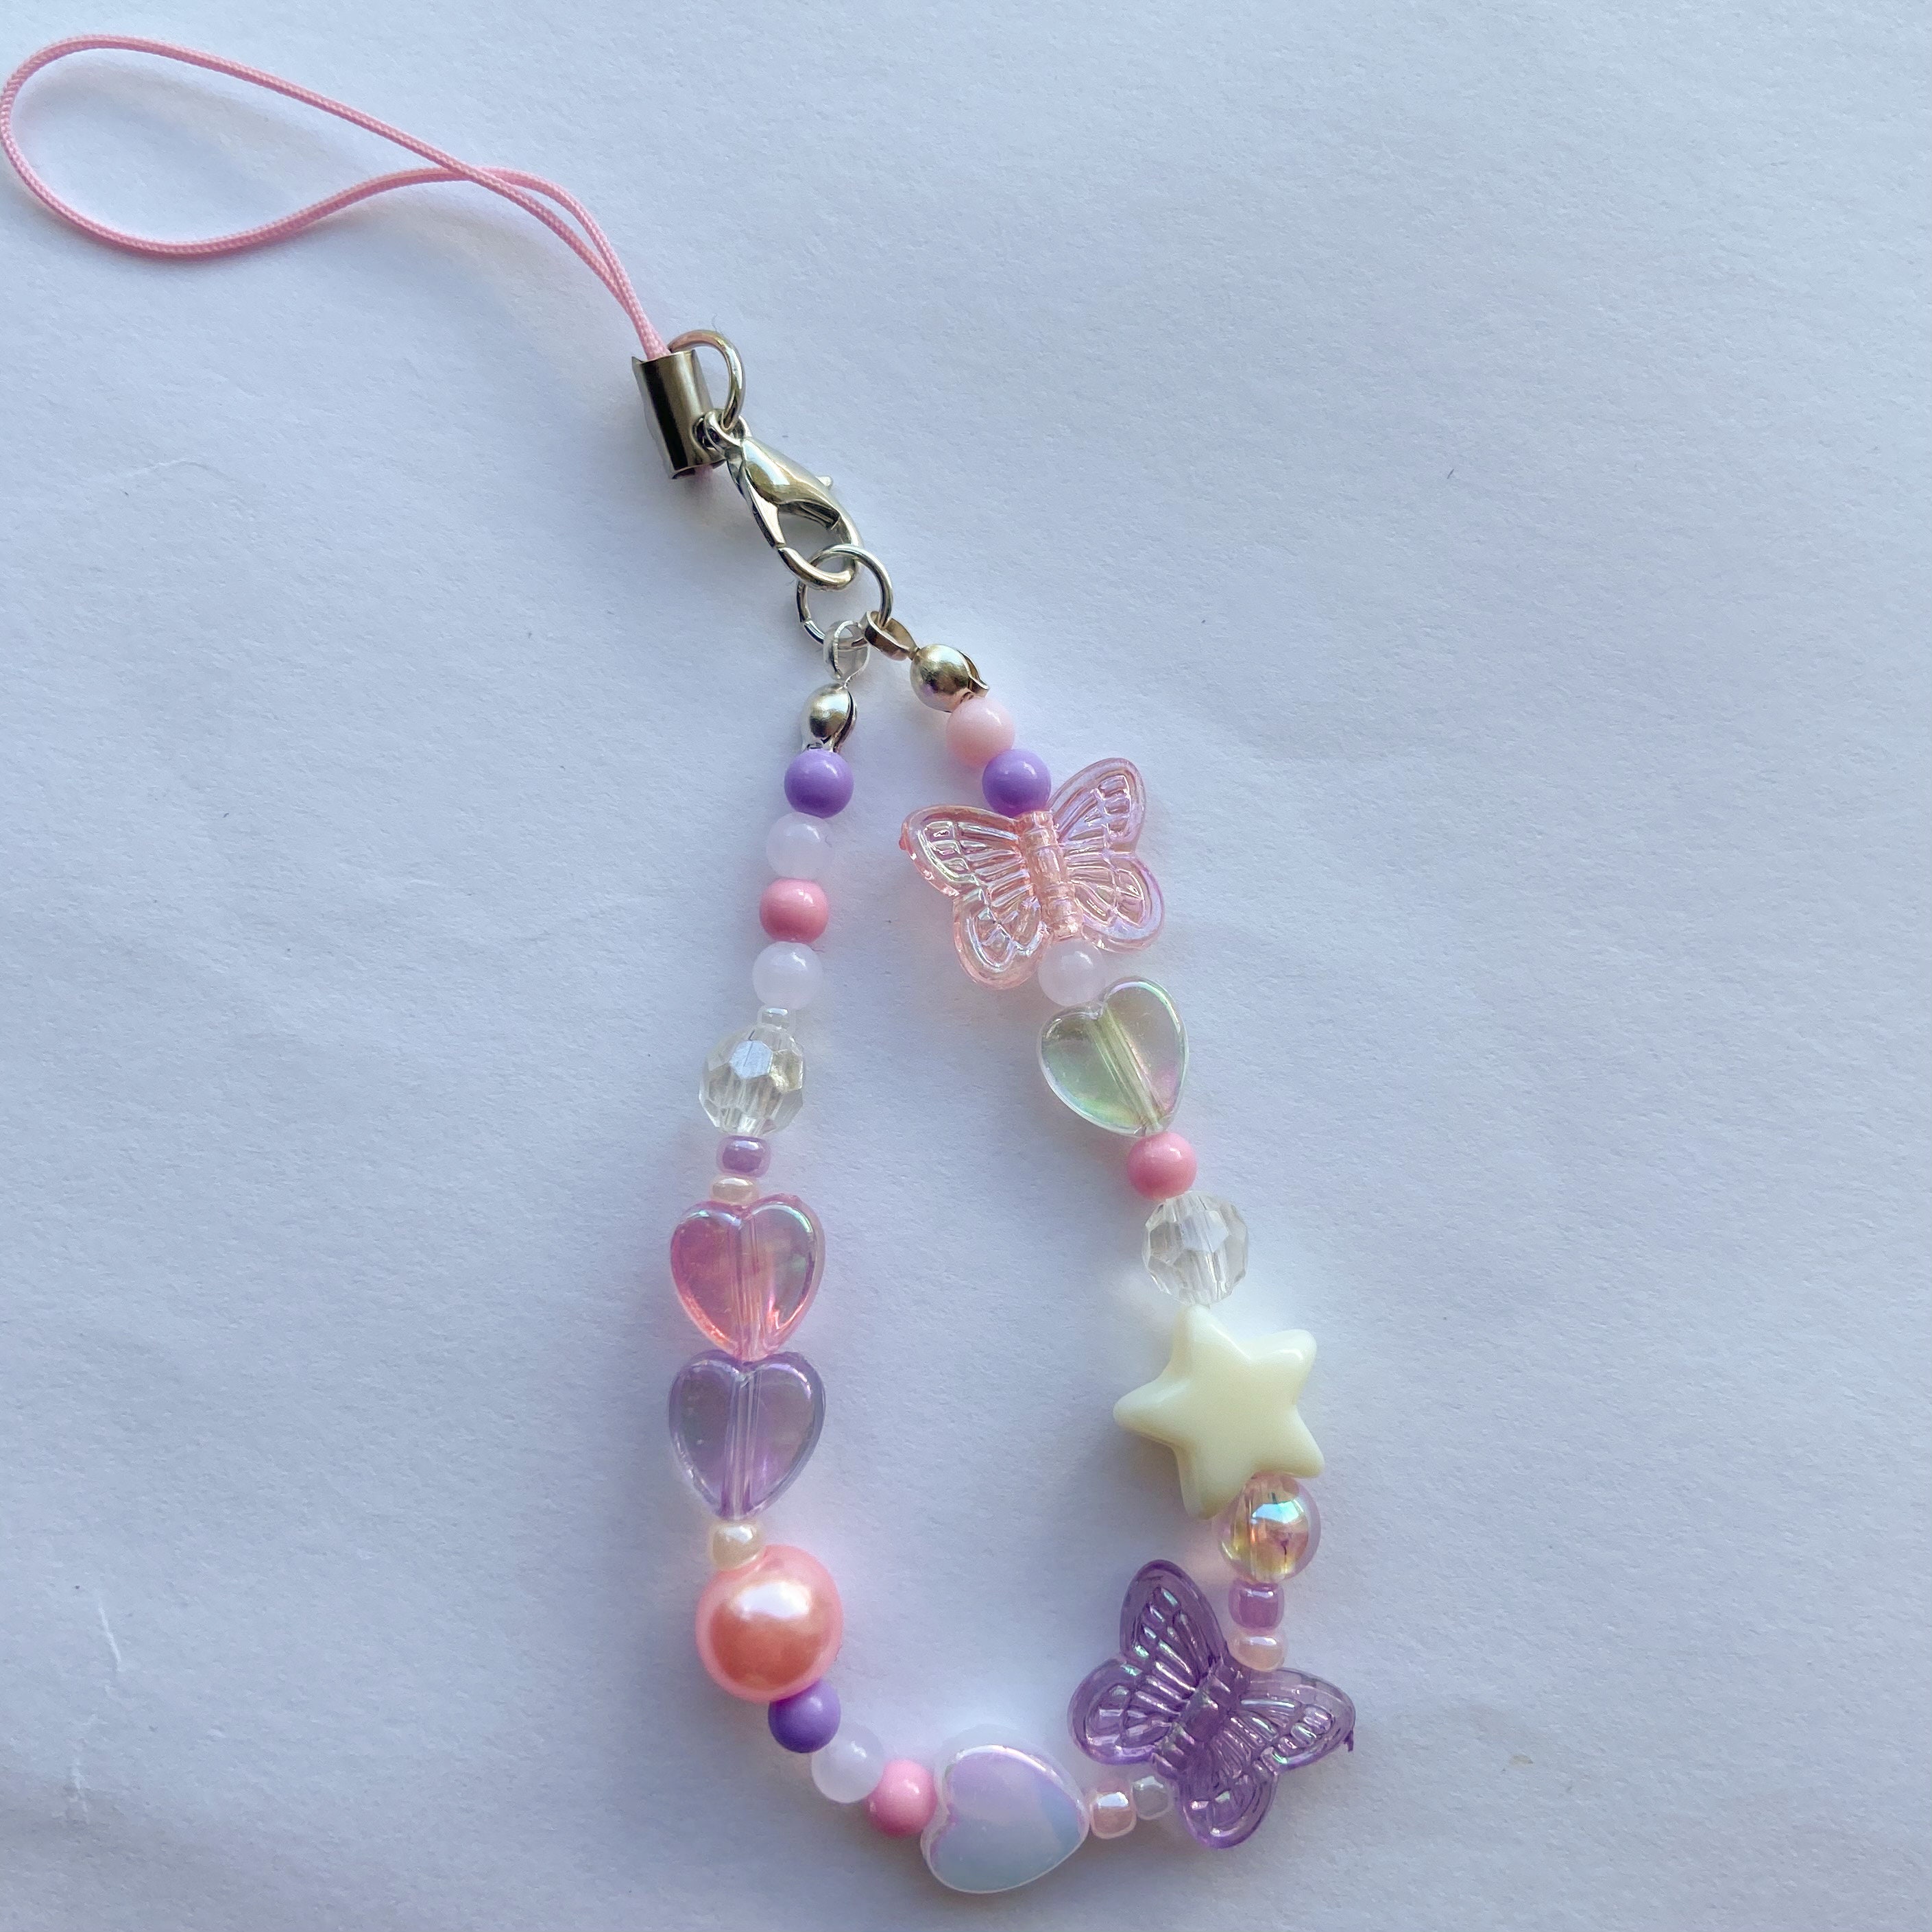 Cute Pink and Purple Charm Keychain Strap Airpod Backpack - Etsy